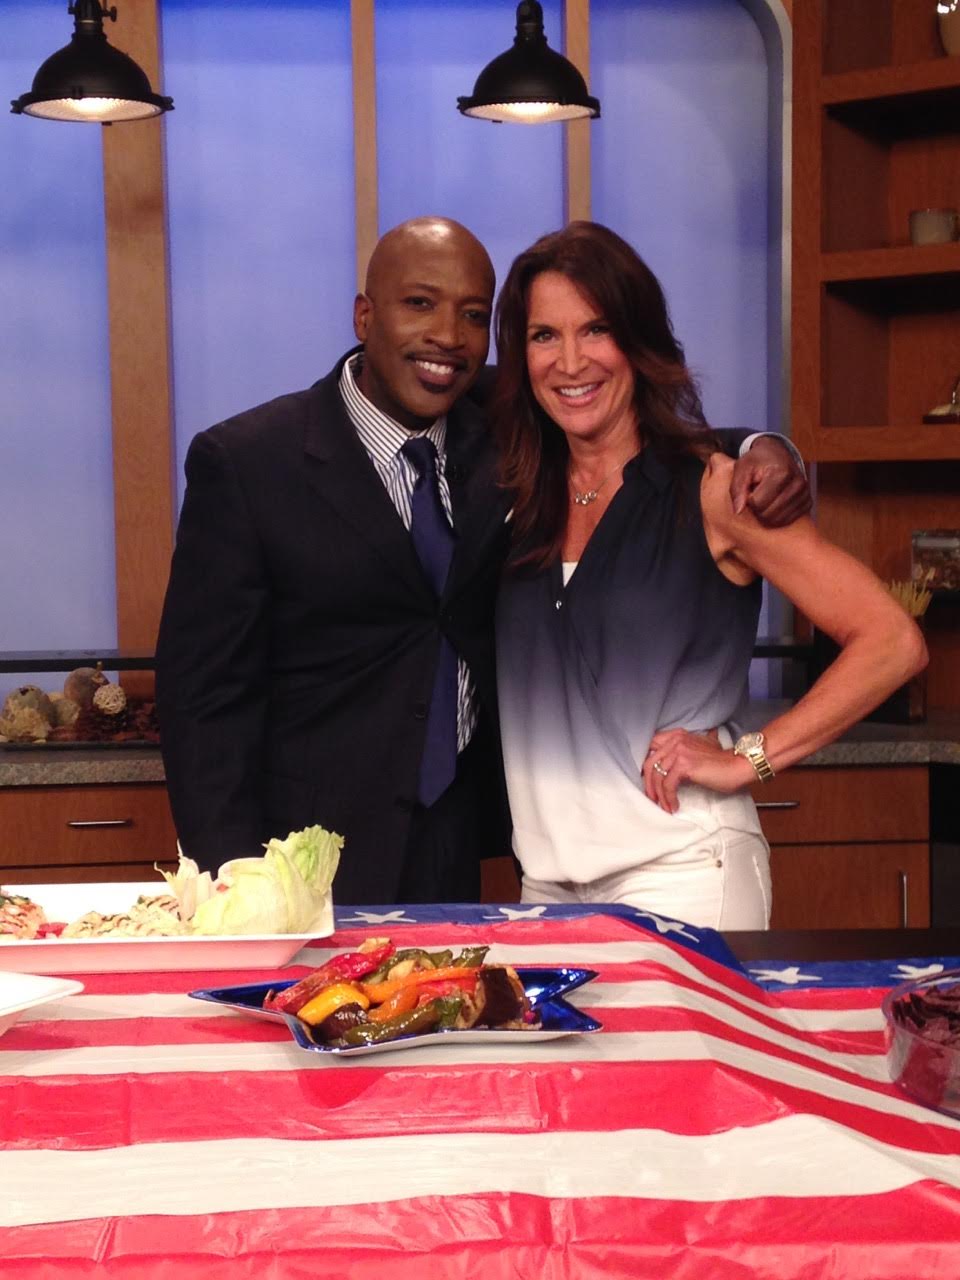 Debi Silber and TV host Antwon Lewis